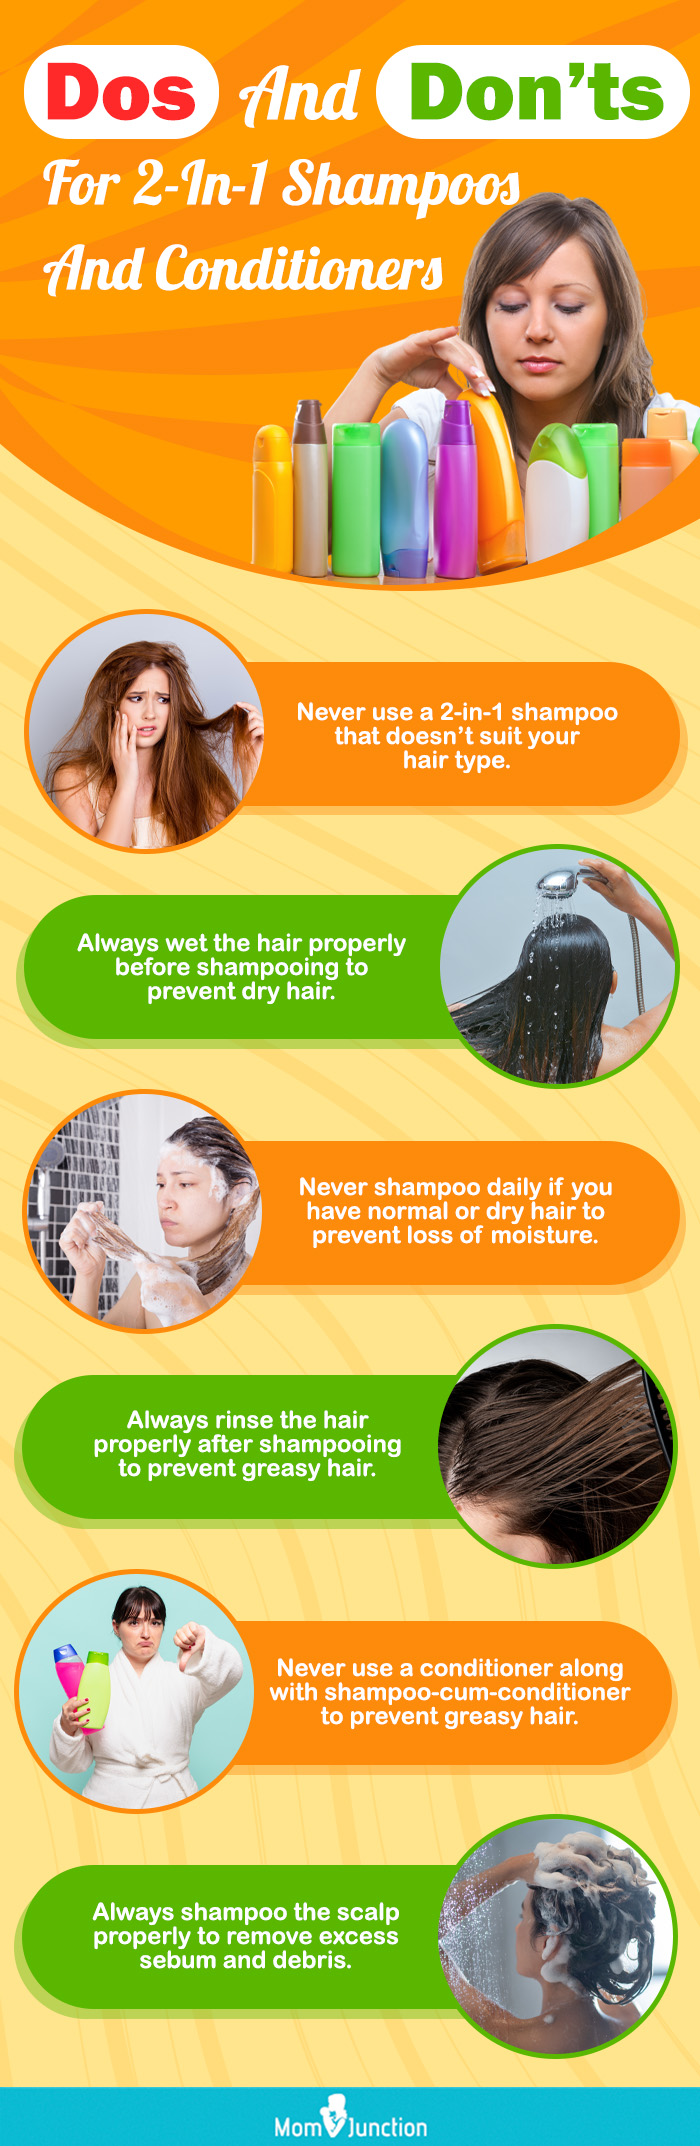 Dos And Don’ts For 2-In-1 Shampoos And Conditioners